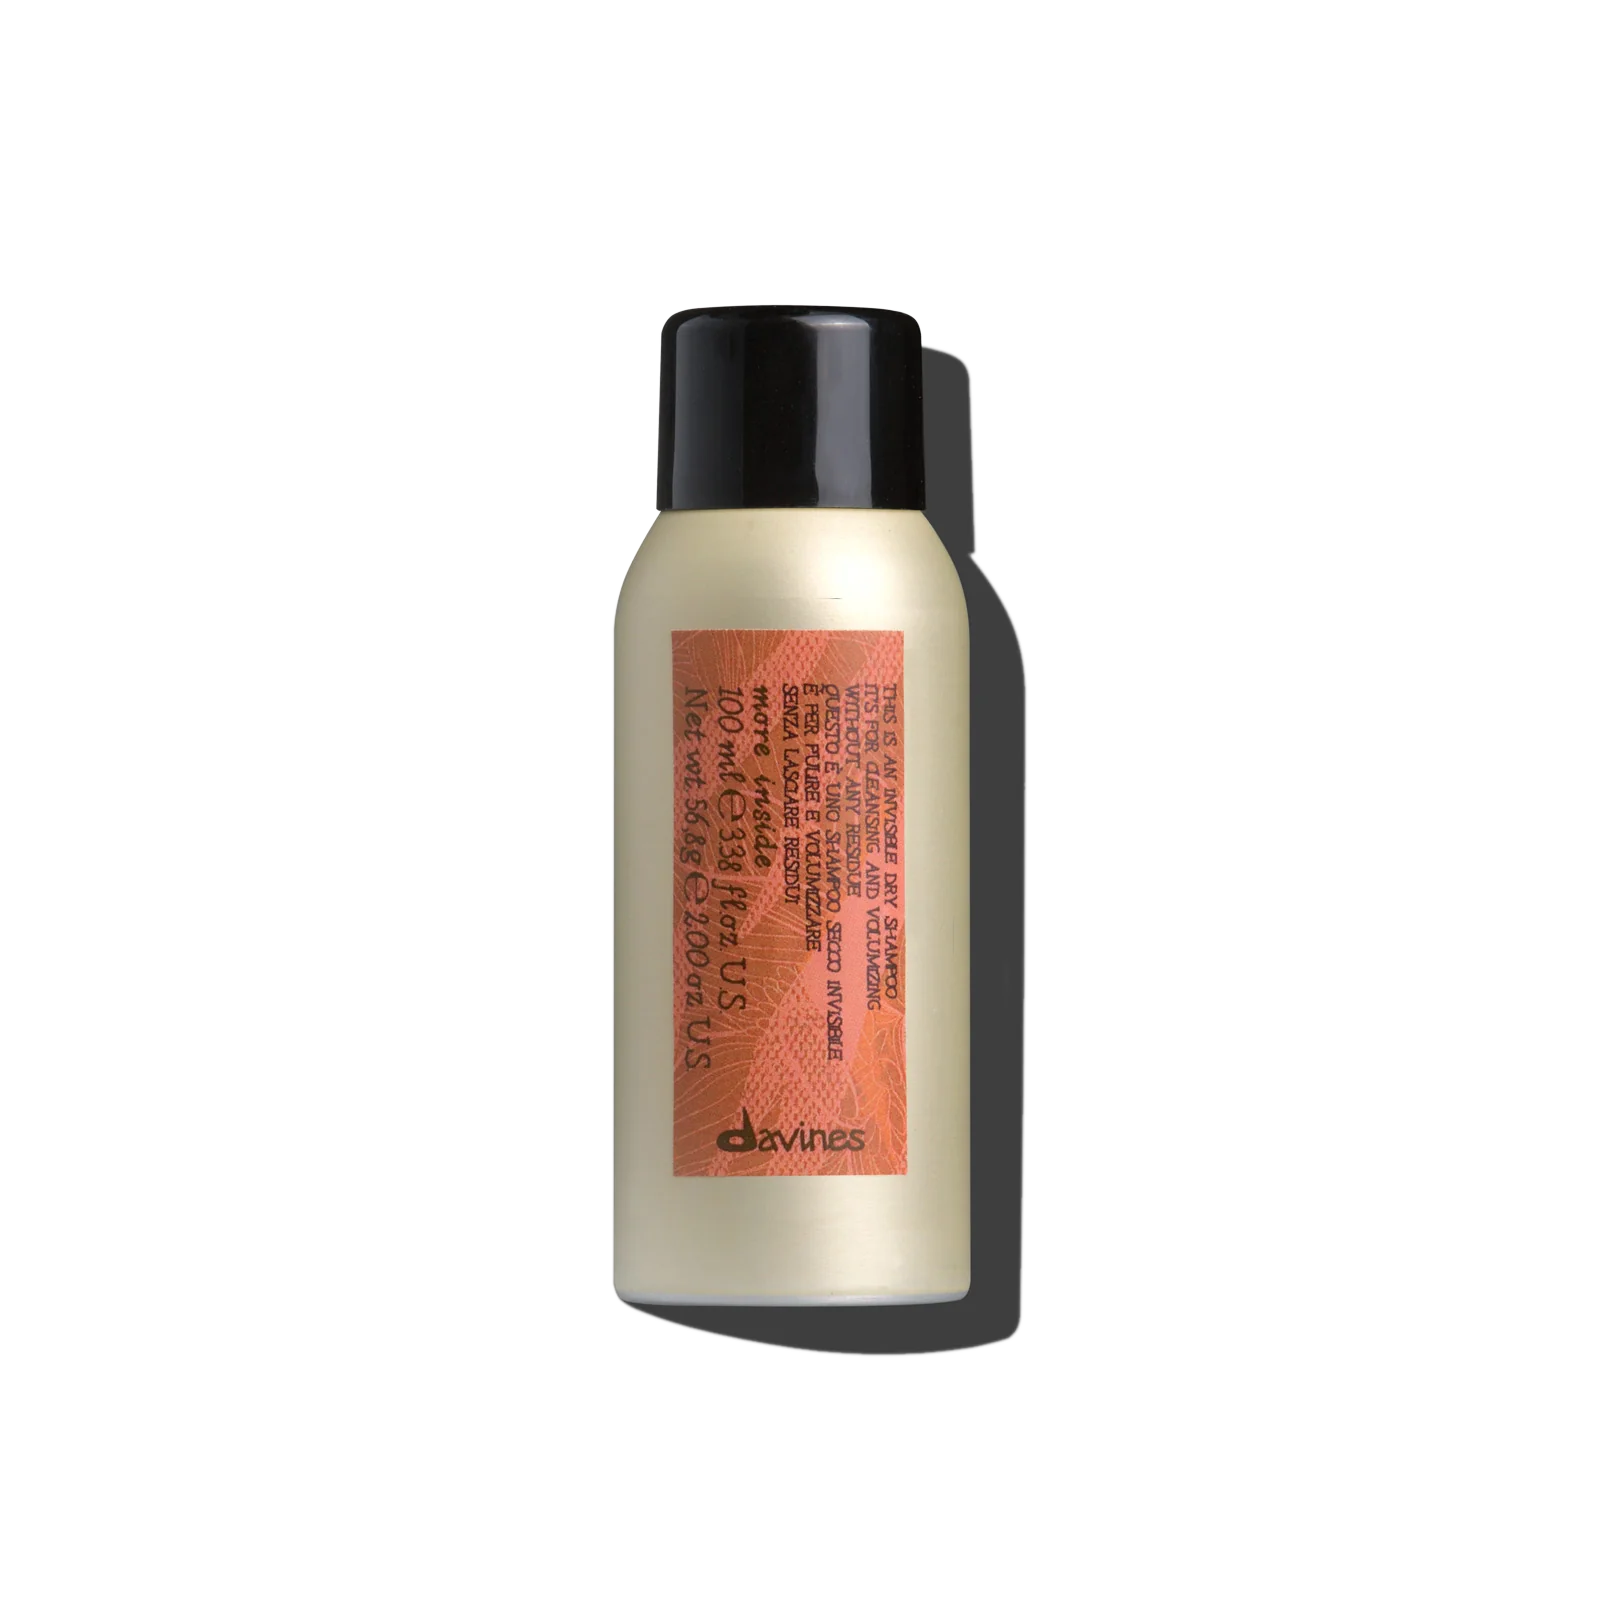 Davines This is an Invisible Dry Shampoo (Travel Size)